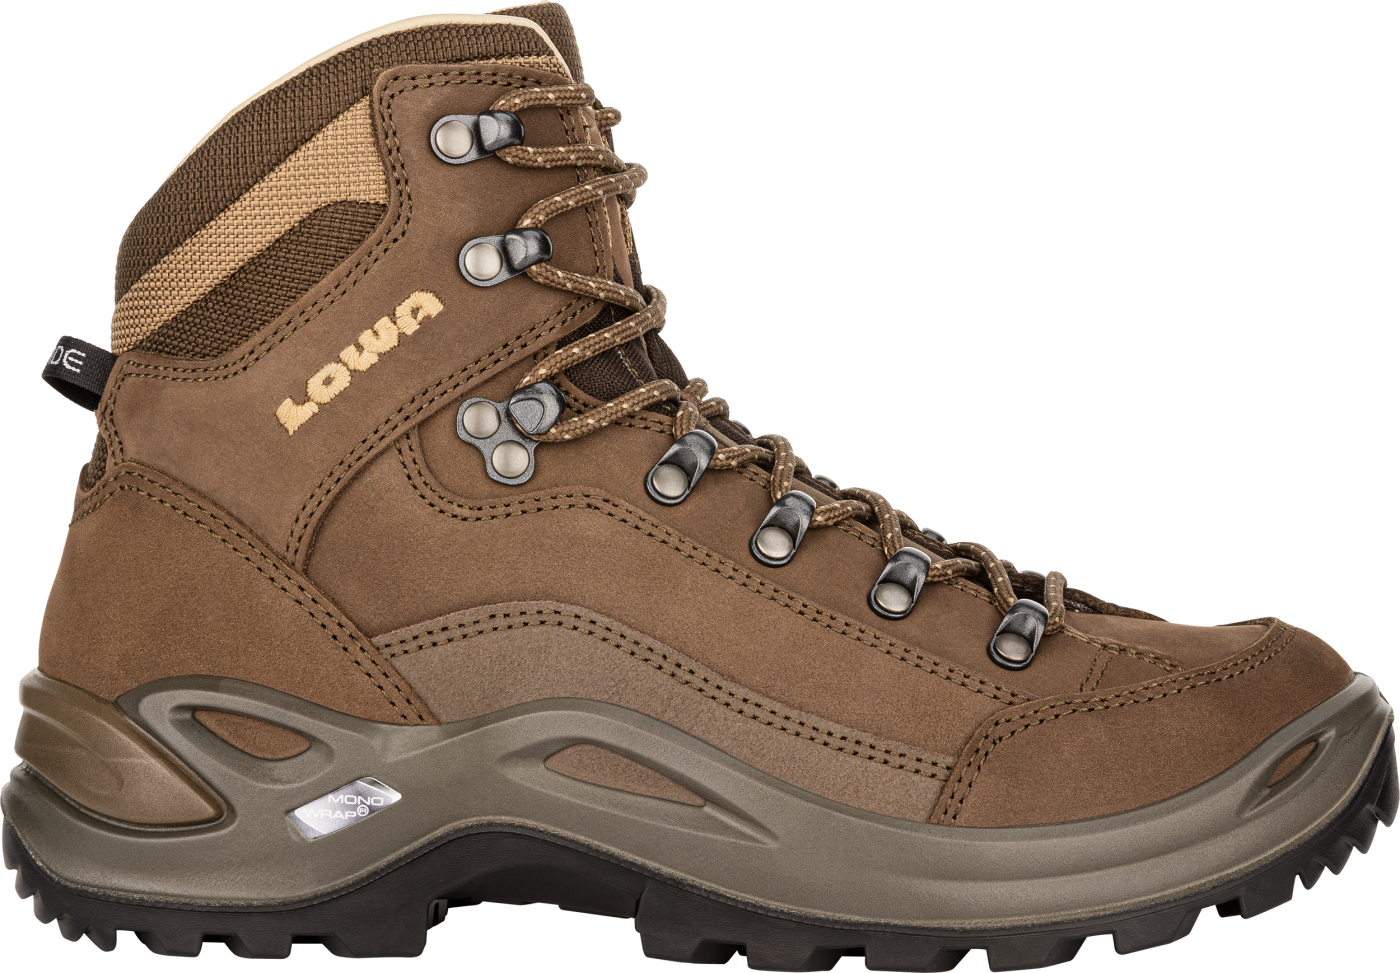 RENEGADE LL MID Ws: ALL TERRAIN CLASSIC Shoes for Women | LOWA INT